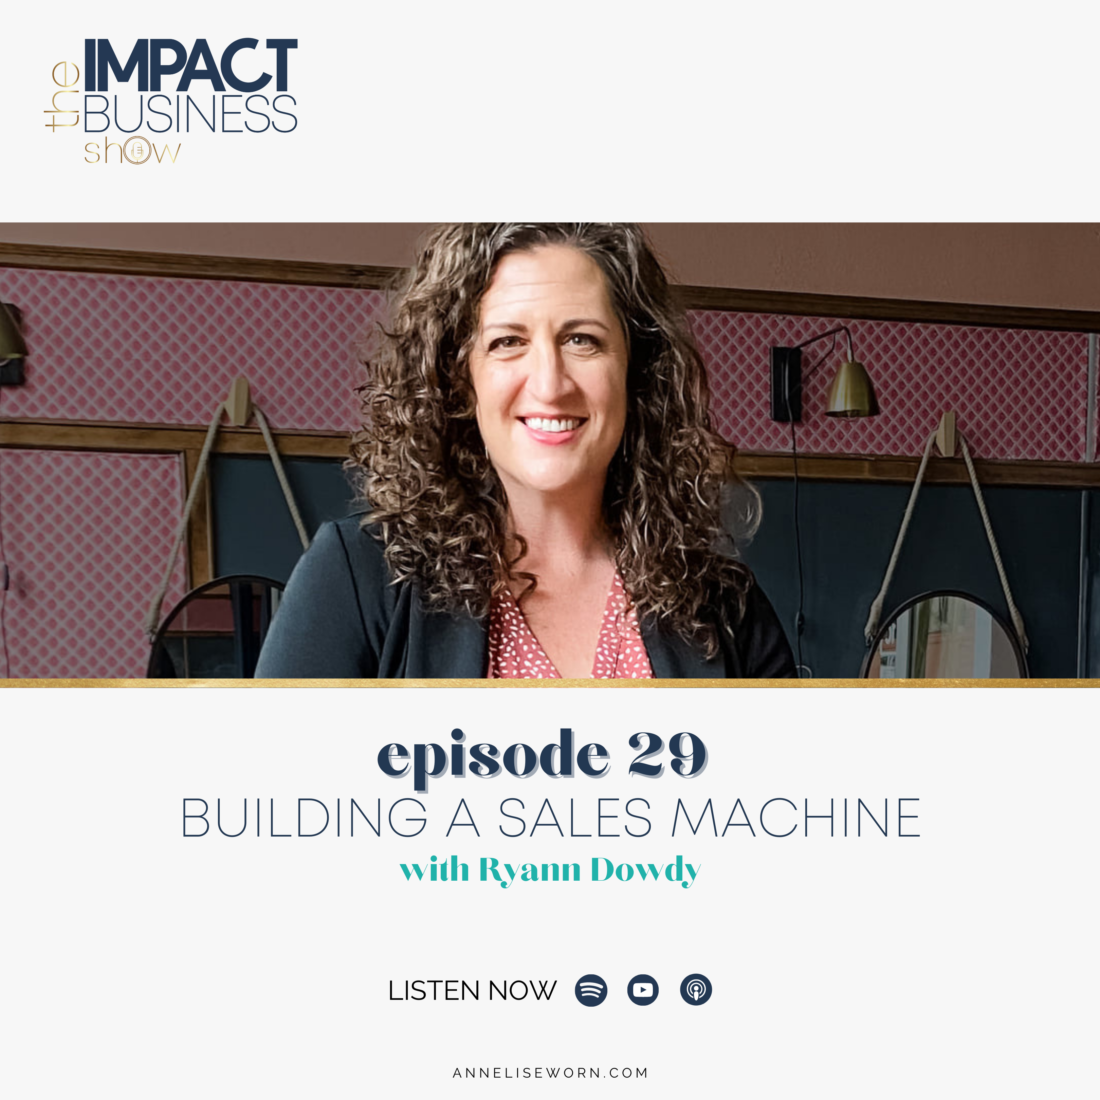 Impact Business Show E28 Building A Sales Machine with Ryann Dowdy